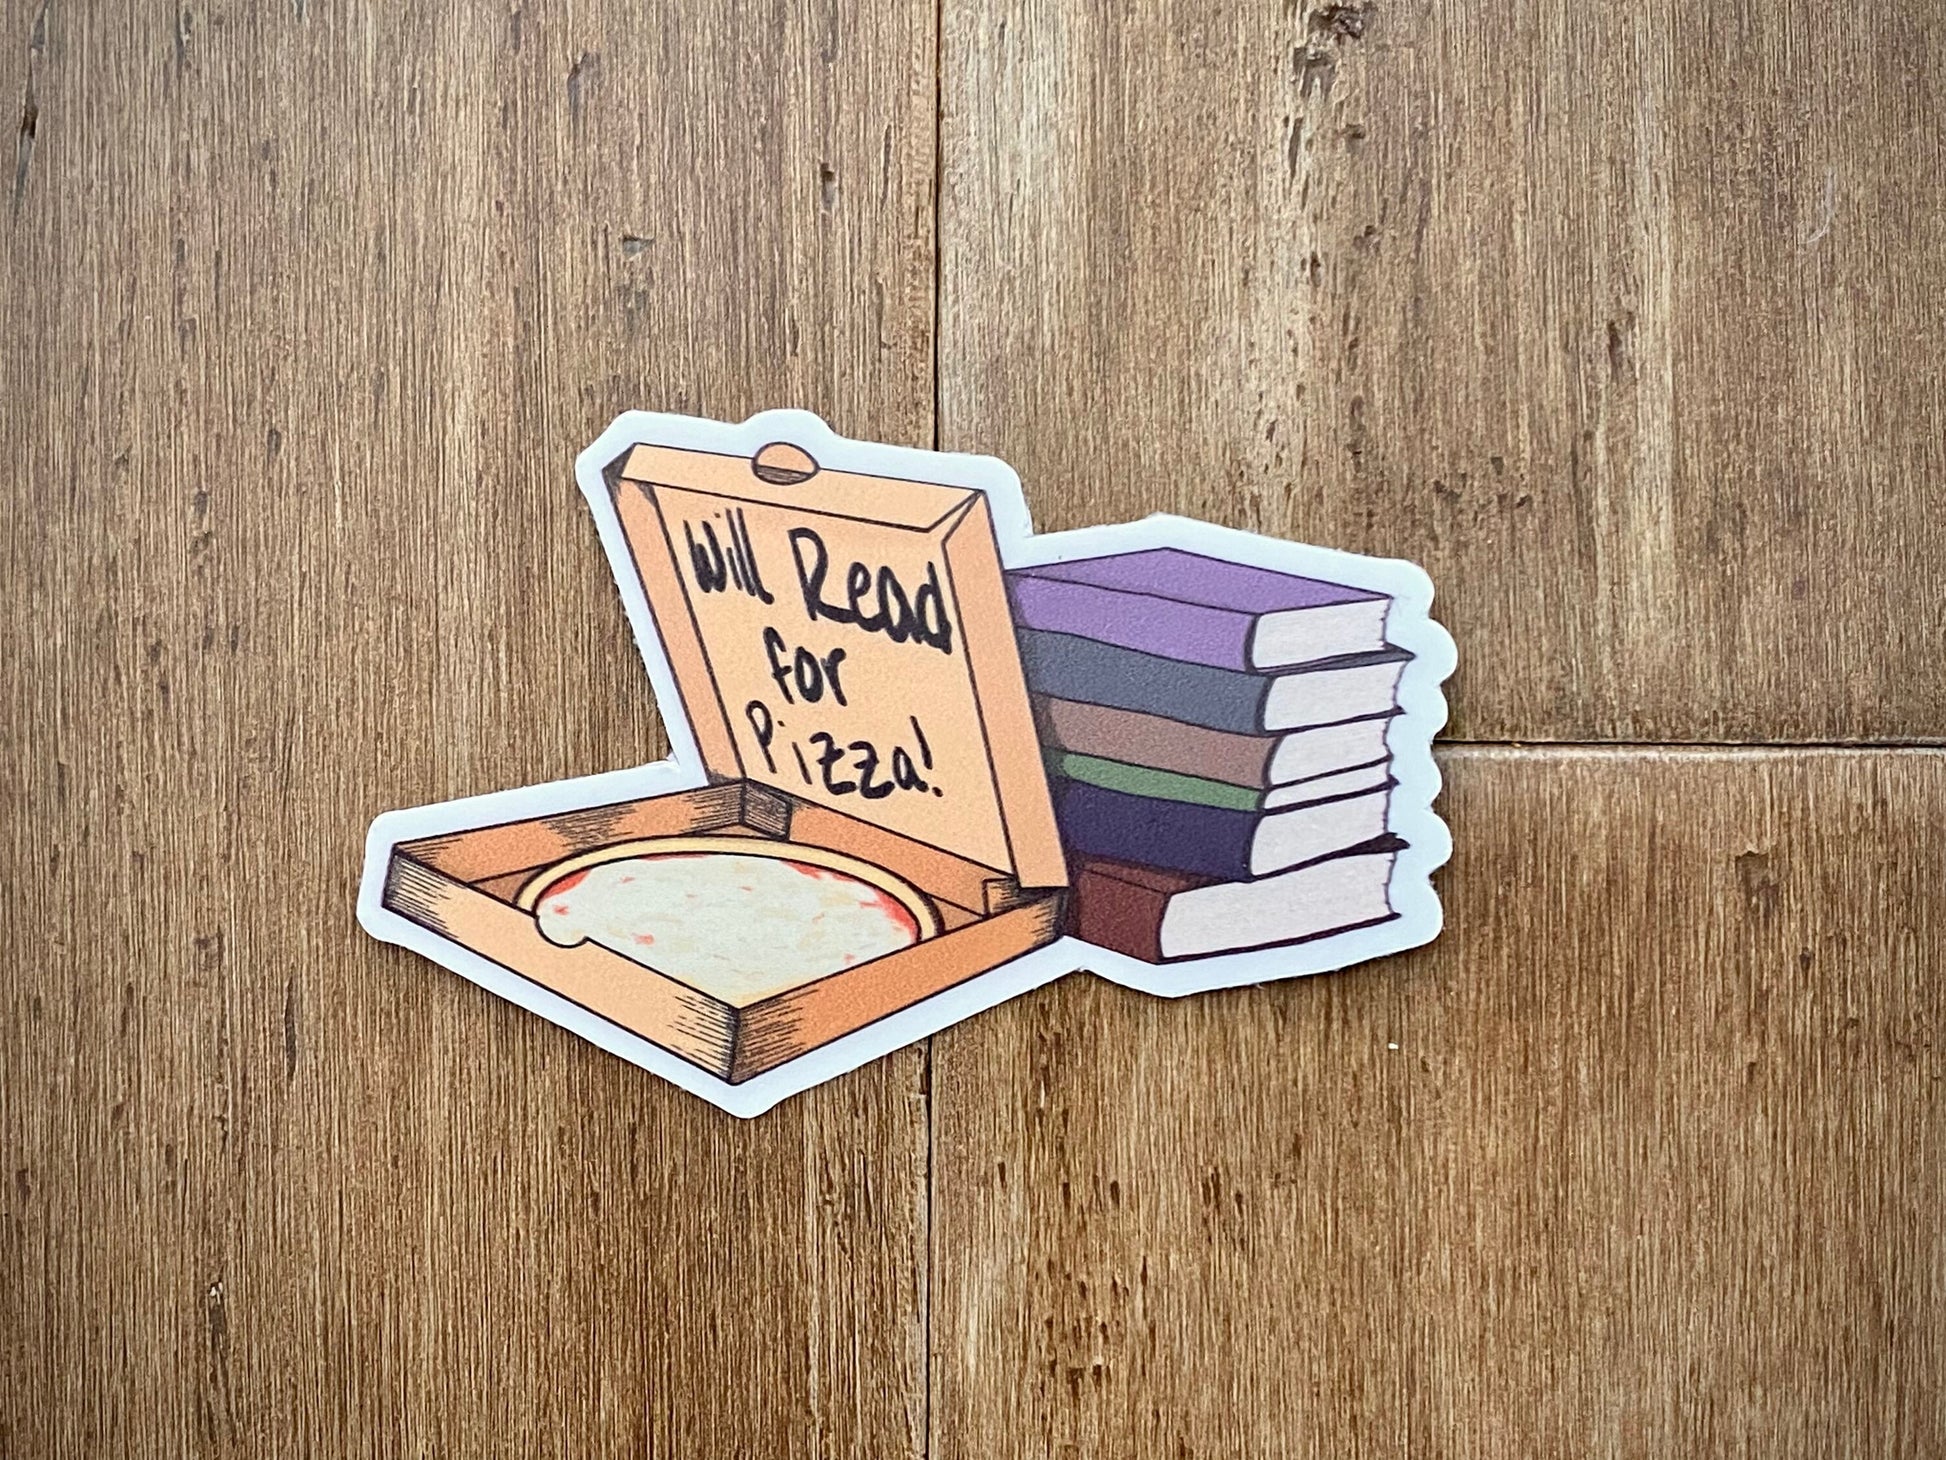 sticker showing a pizza box with a stack of books with text "will read for pizza" on a wood background